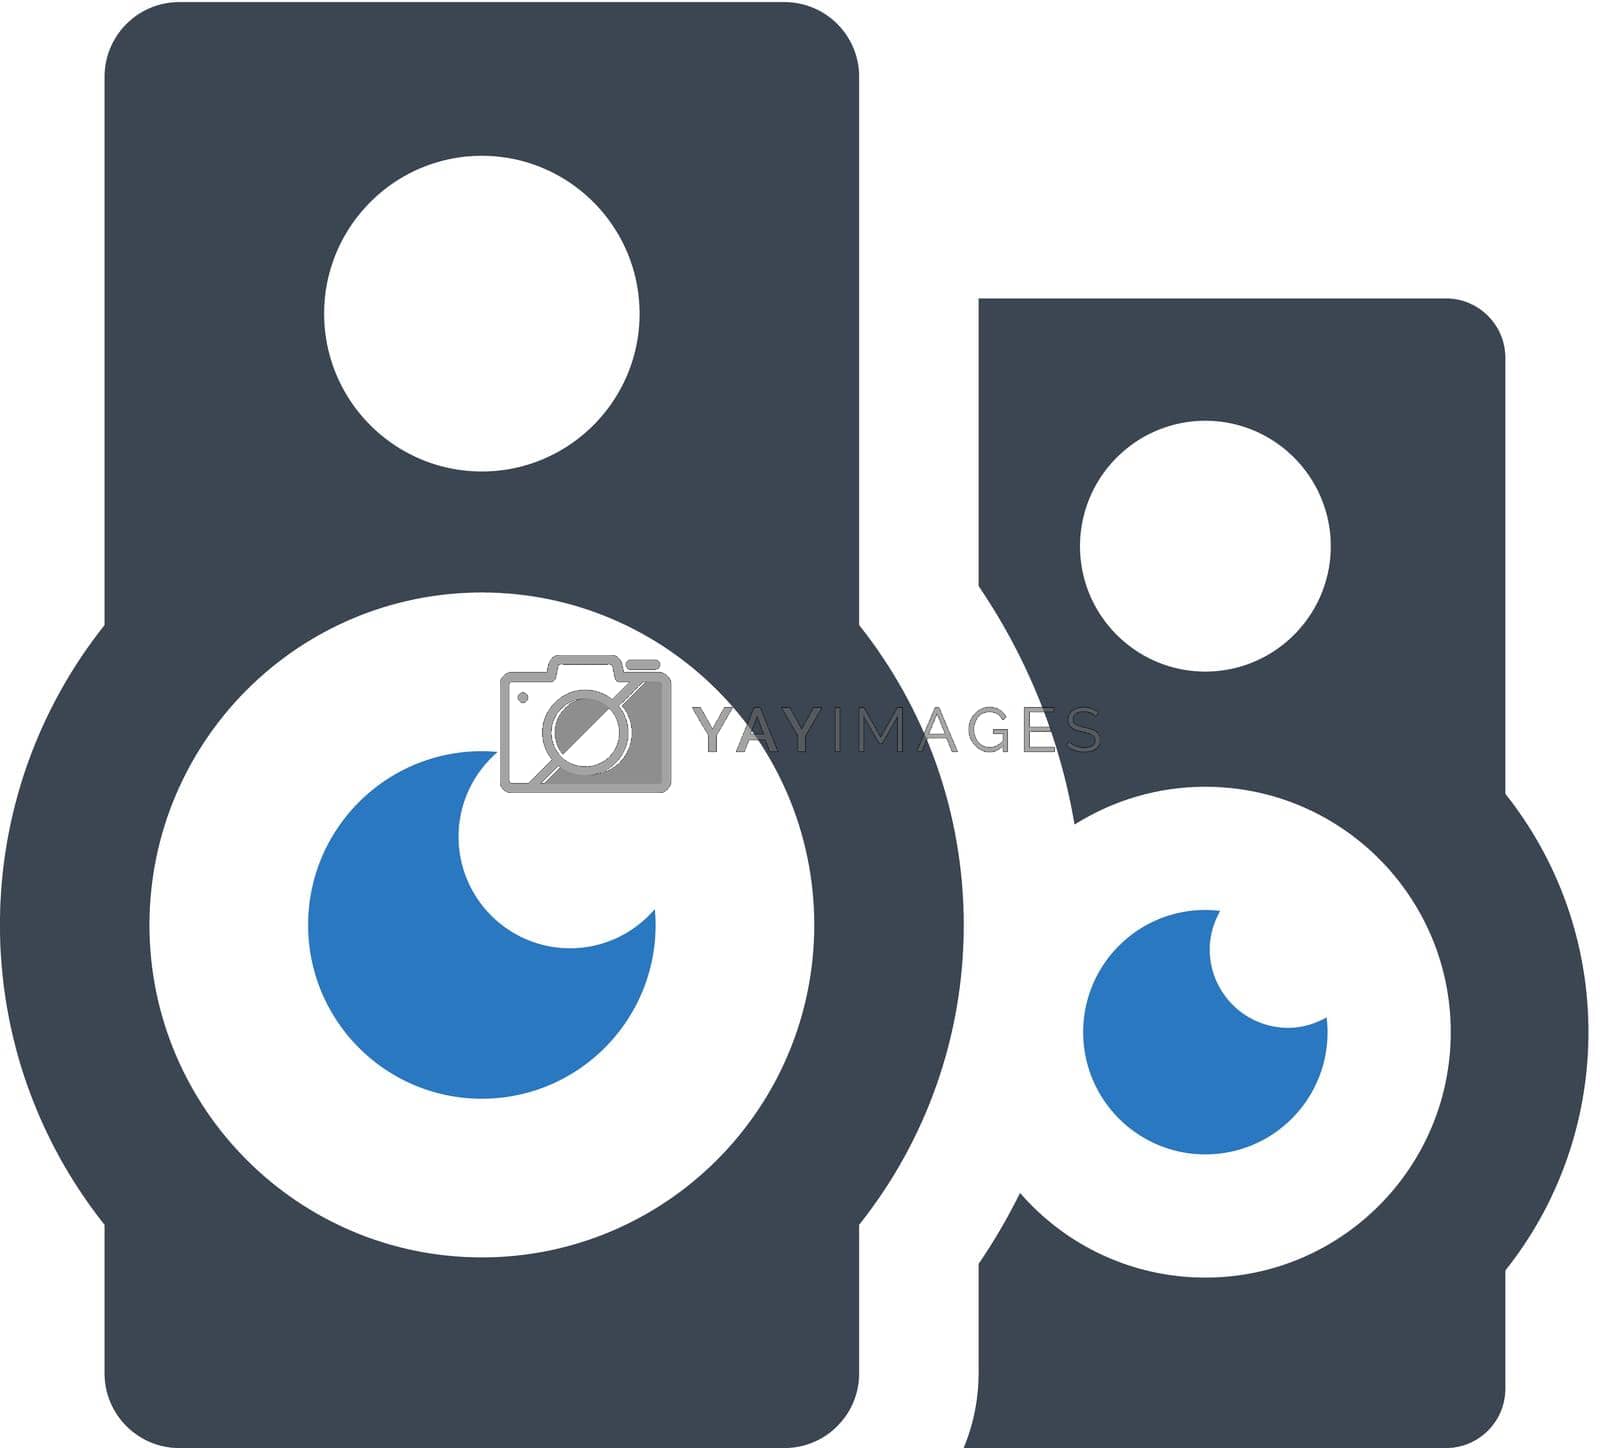 Royalty free image of Speaker icon by delwar018